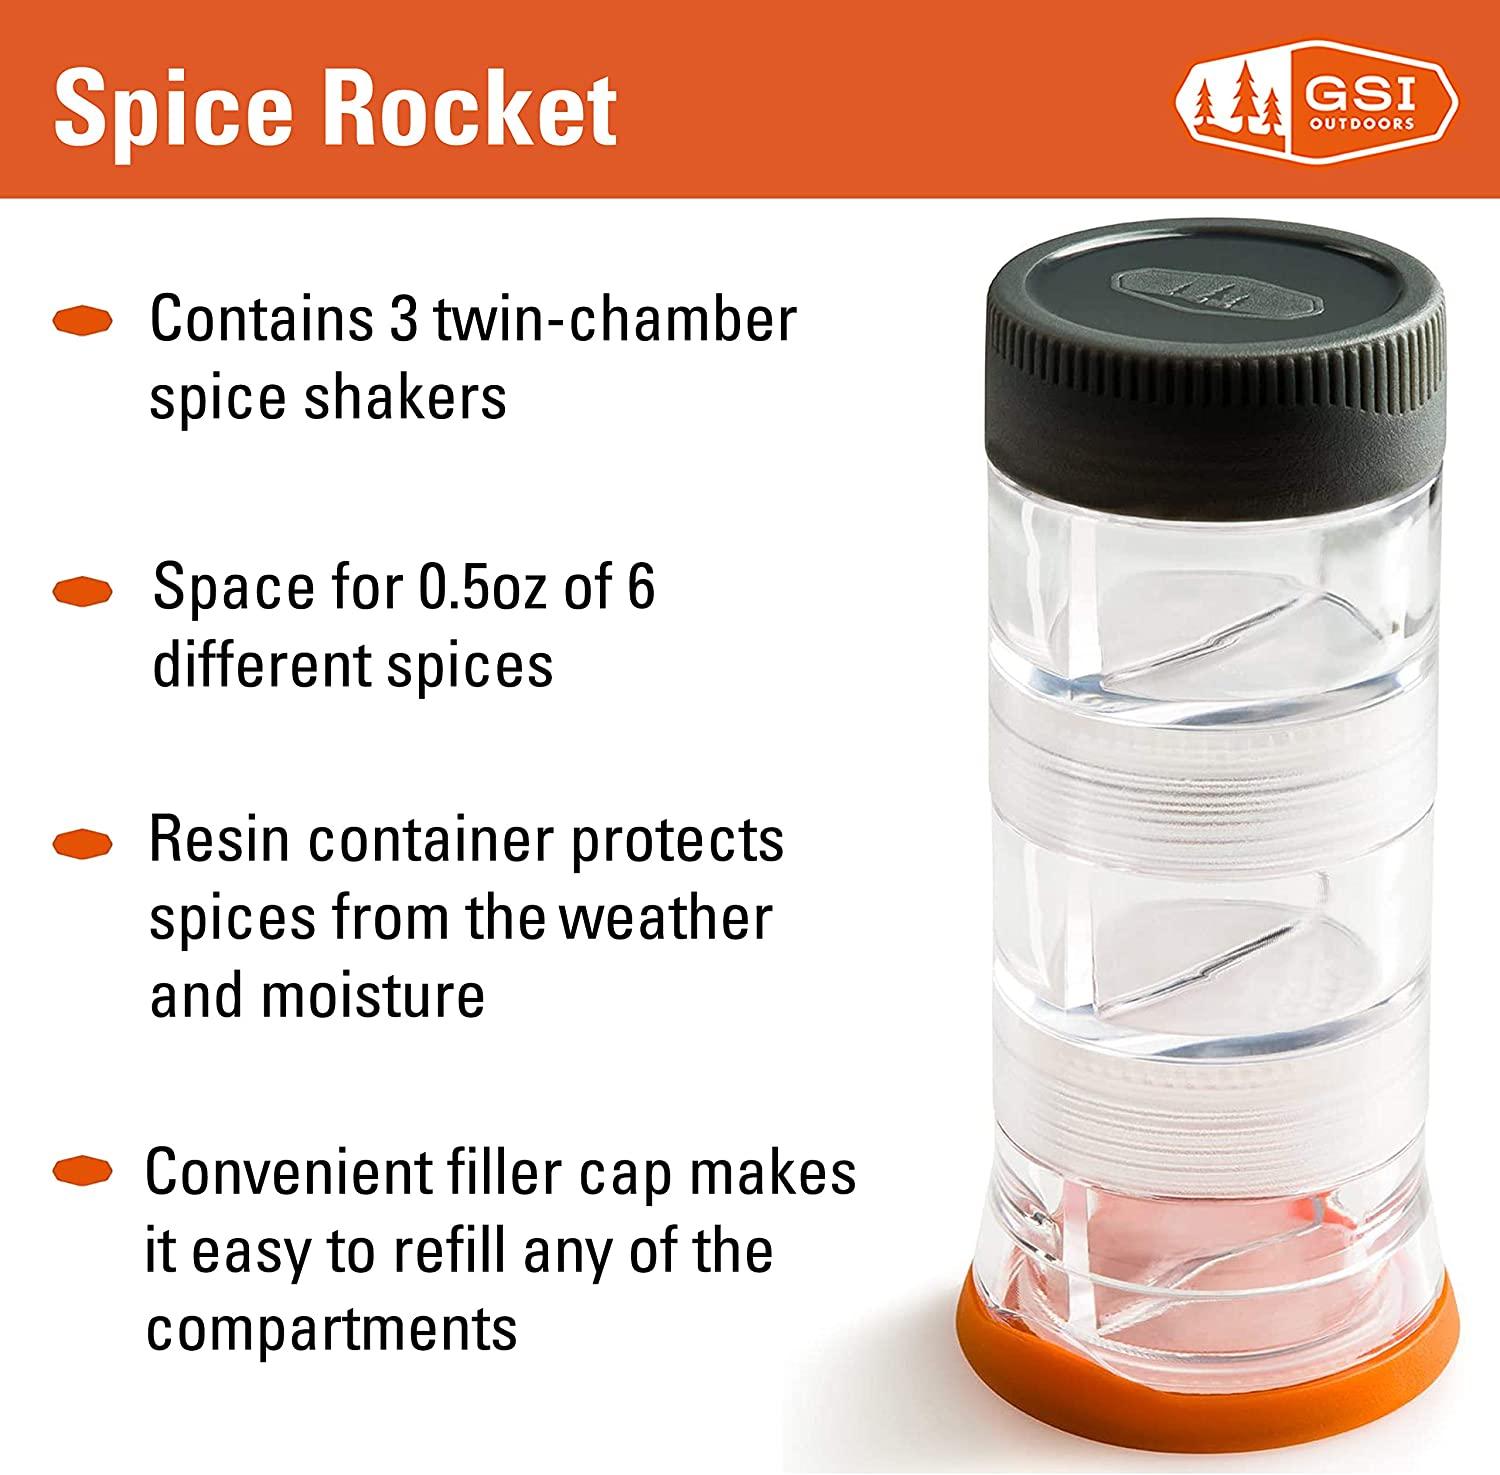 GSI Outdoors Spice Rocket